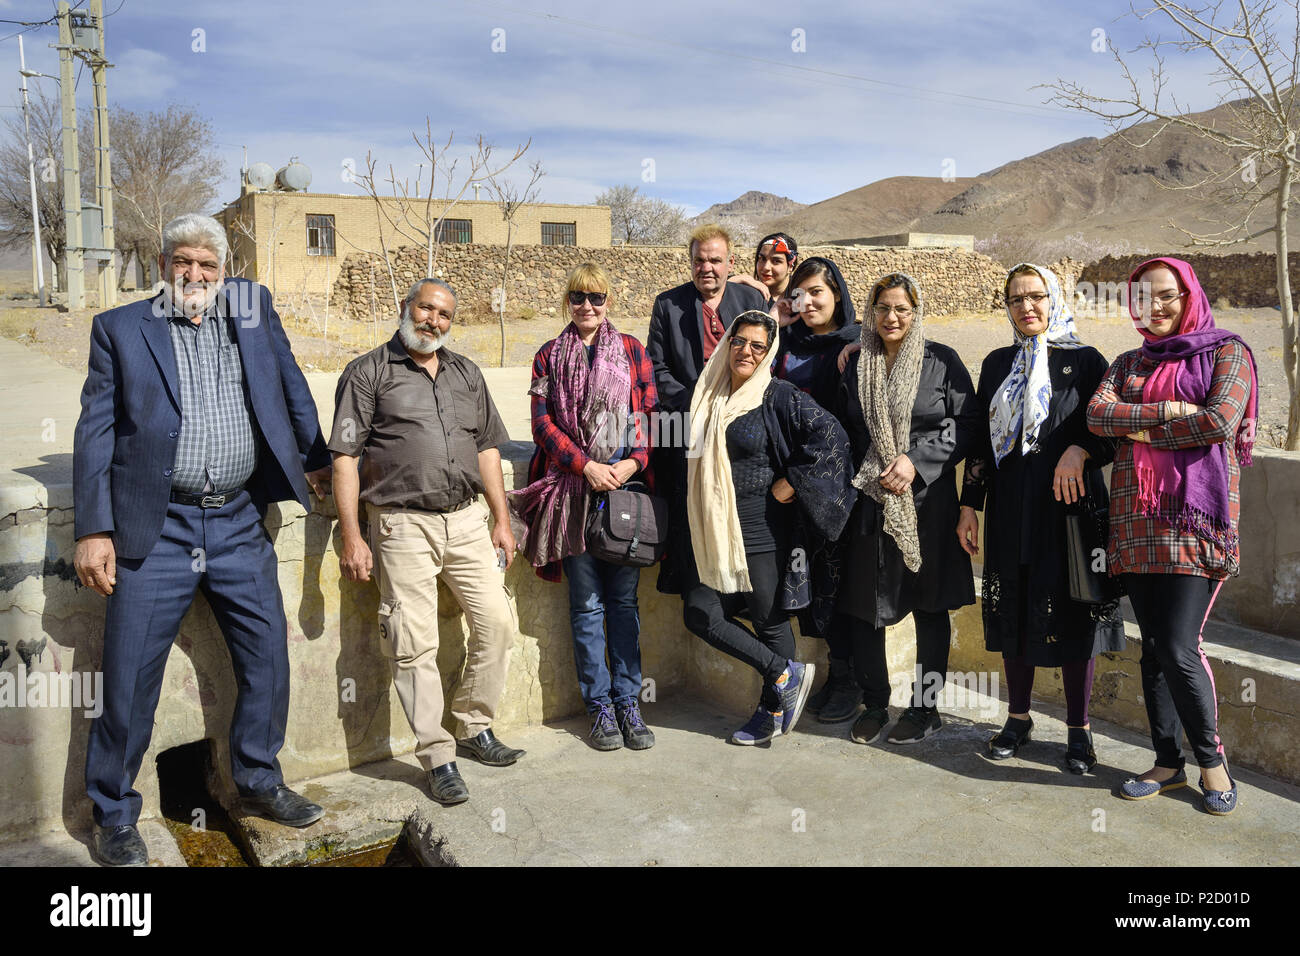 Isfahan province, Iran - March 22, 2018: Iranian big family with tourist in the village. Iran Stock Photo